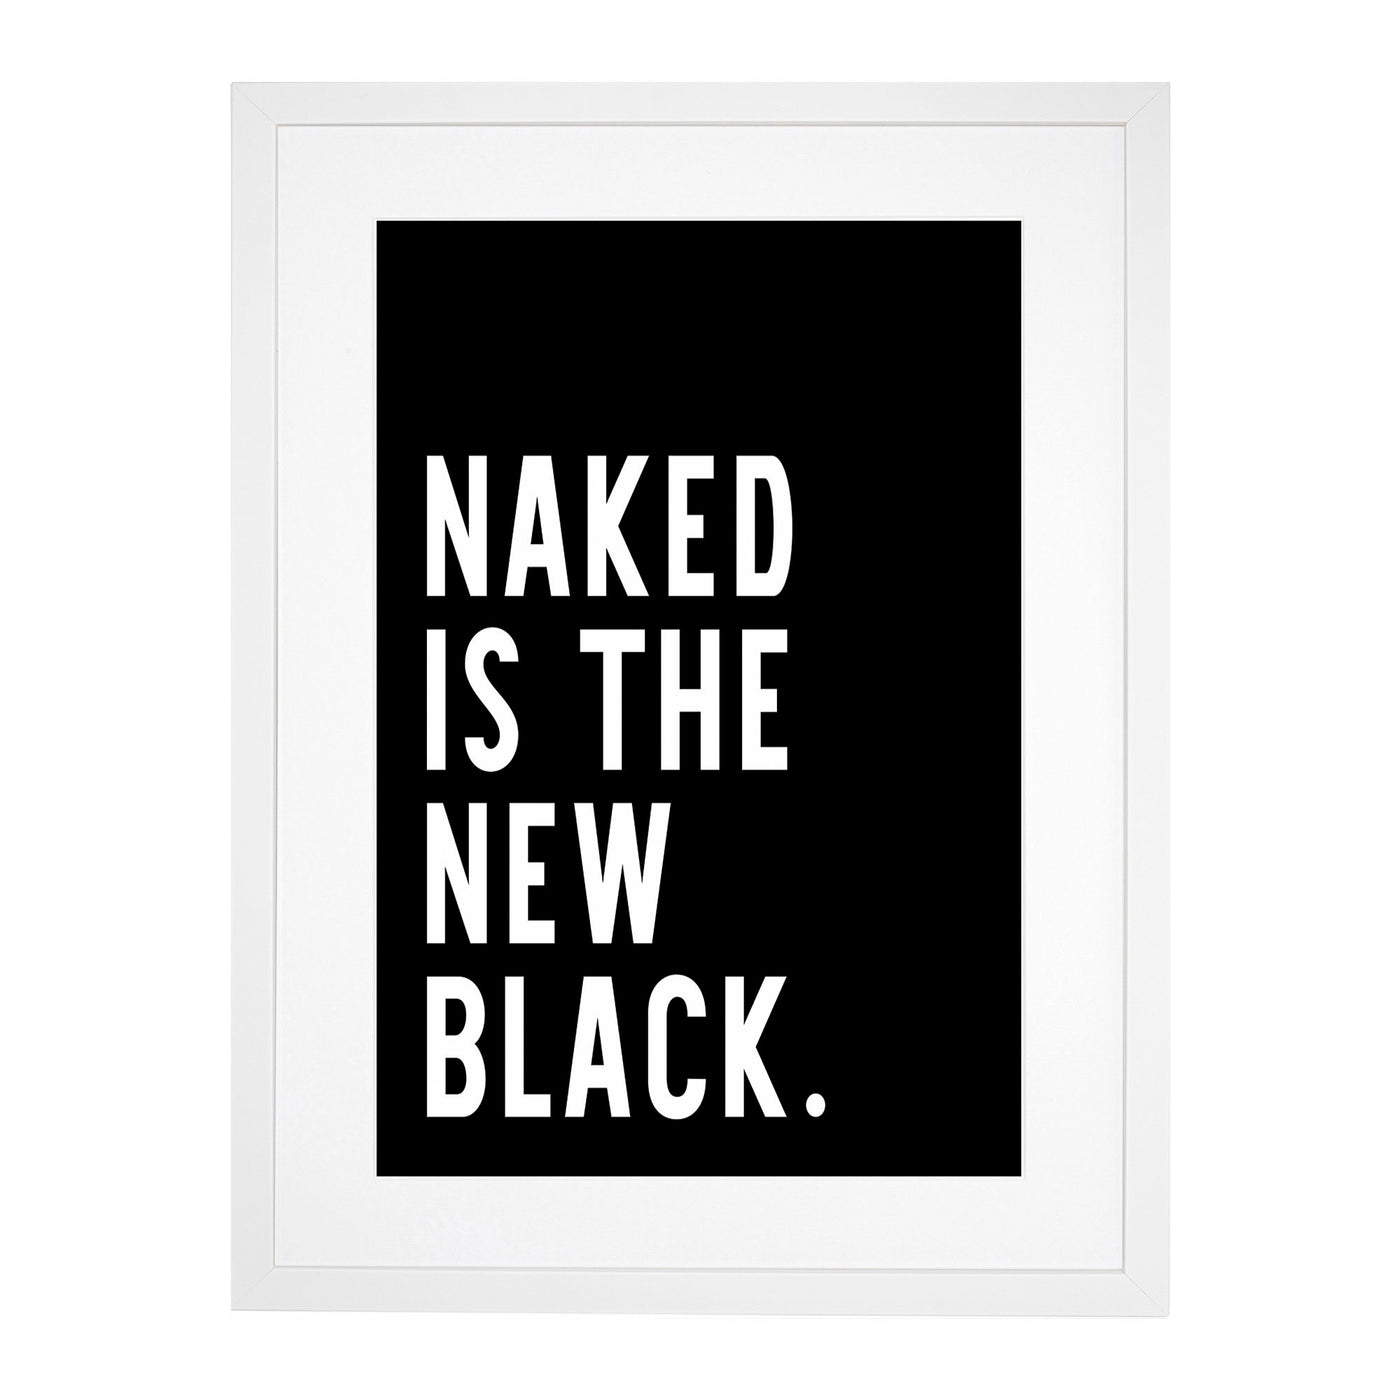 Naked is the New Black